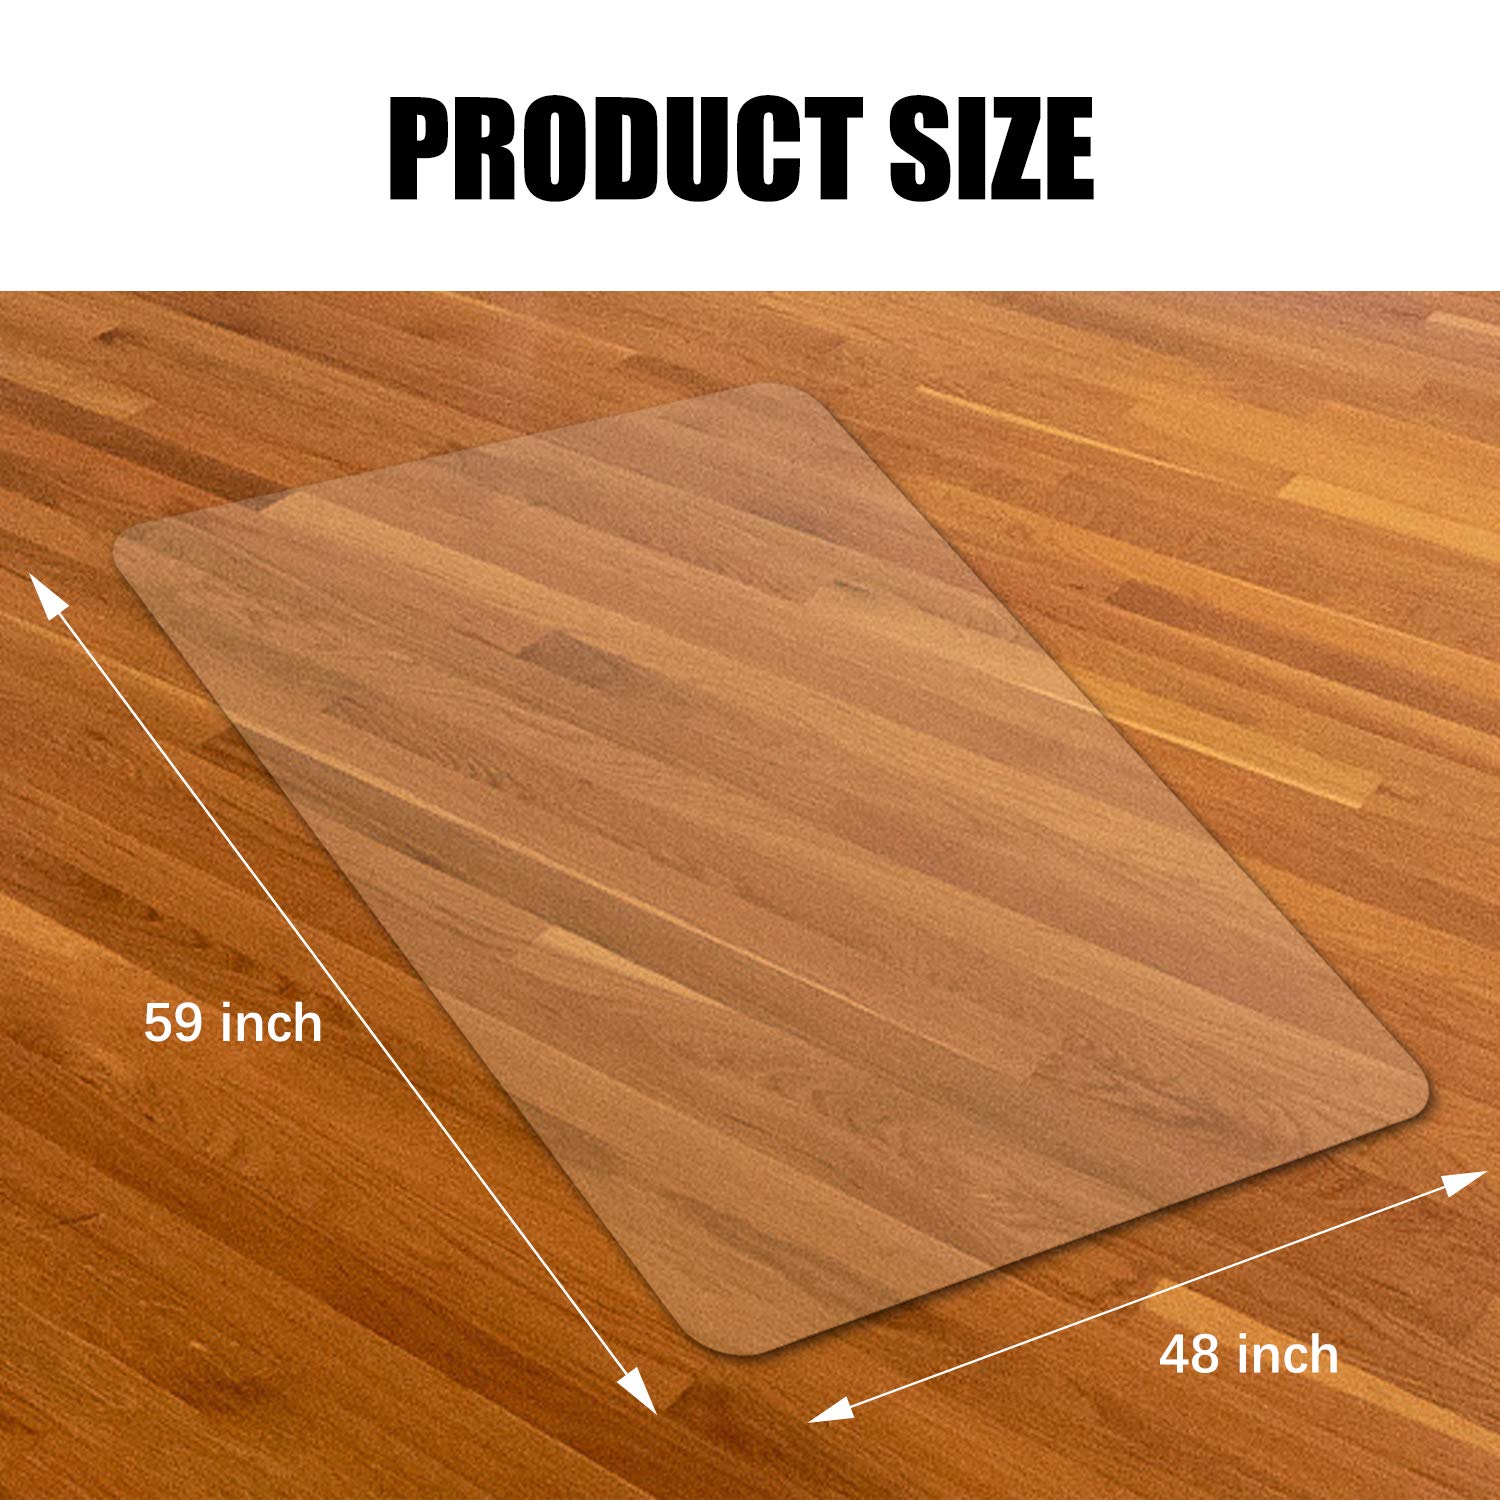 Kuyal Clear Chair Mat, Hard Floor Use, 48" X 59" Transparent Office Home Floor Protector mat Chairmats (48" X 59" Rectangle)